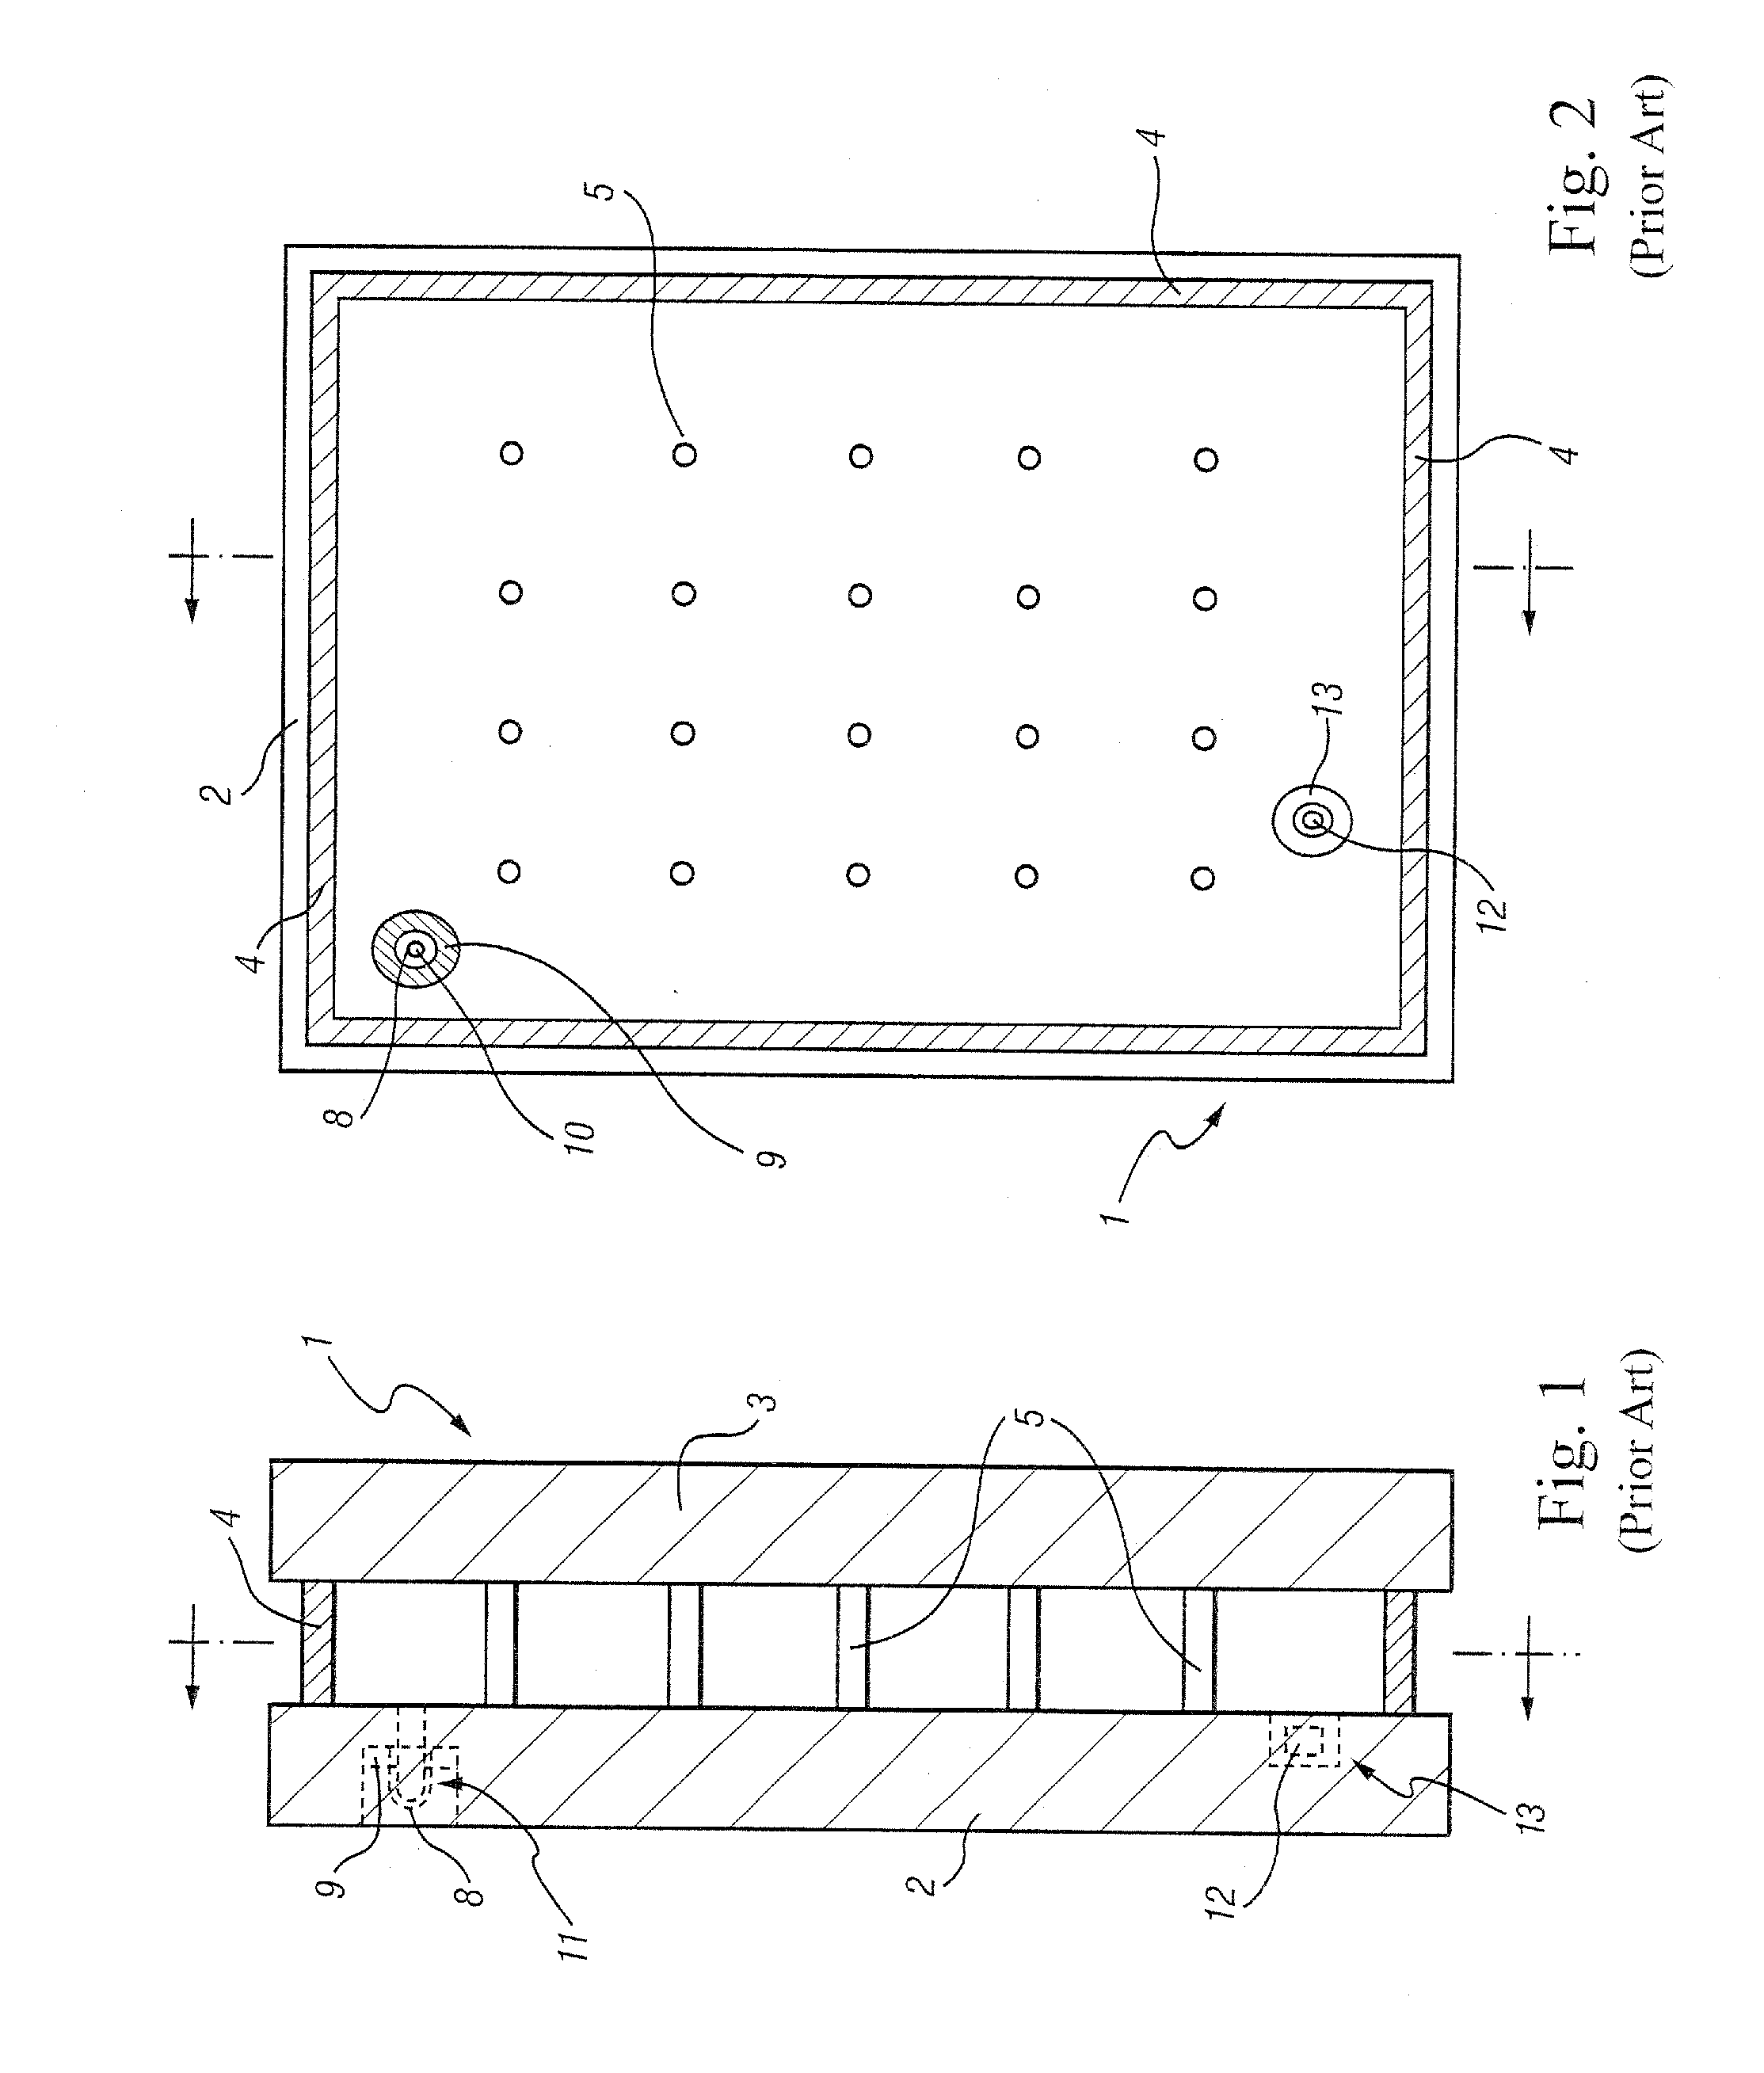 Coefficient of thermal expansion filler for vanadium-based frit materials and/or methods of making and/or using the same